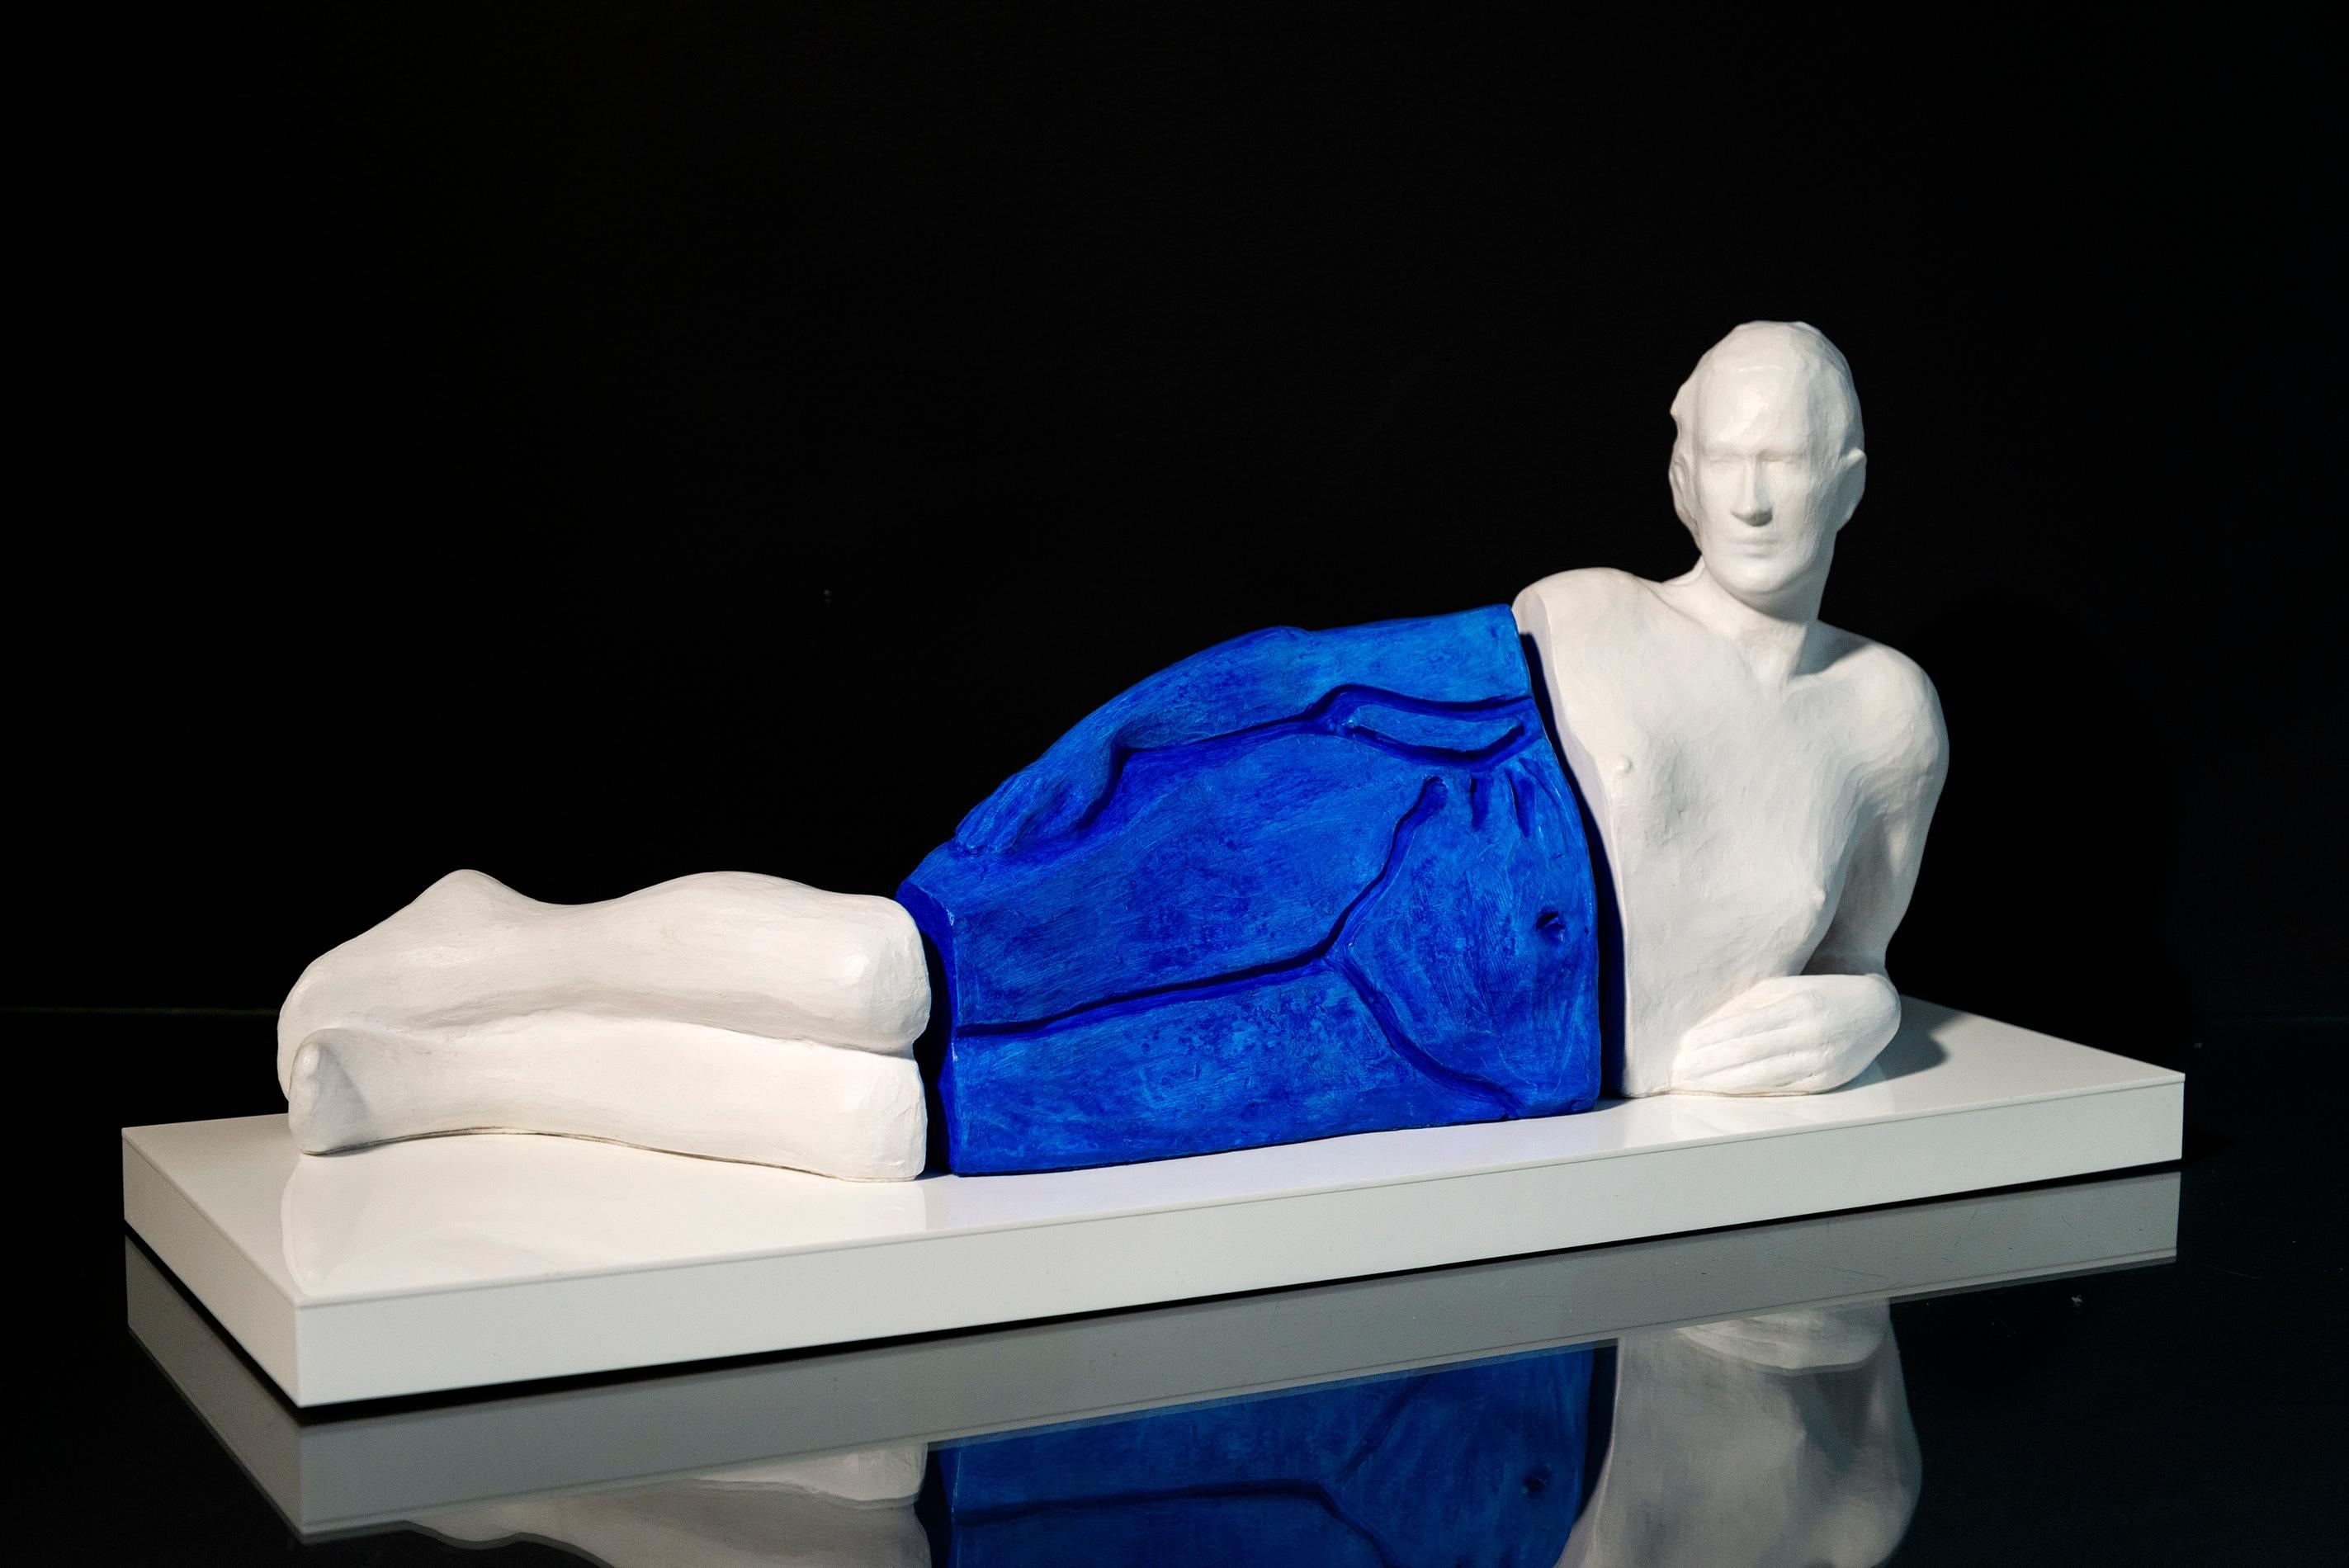 An Impression in Blue - figurative, female, polymer, gypsum, tabletop sculpture - Contemporary Sculpture by Frances Semple